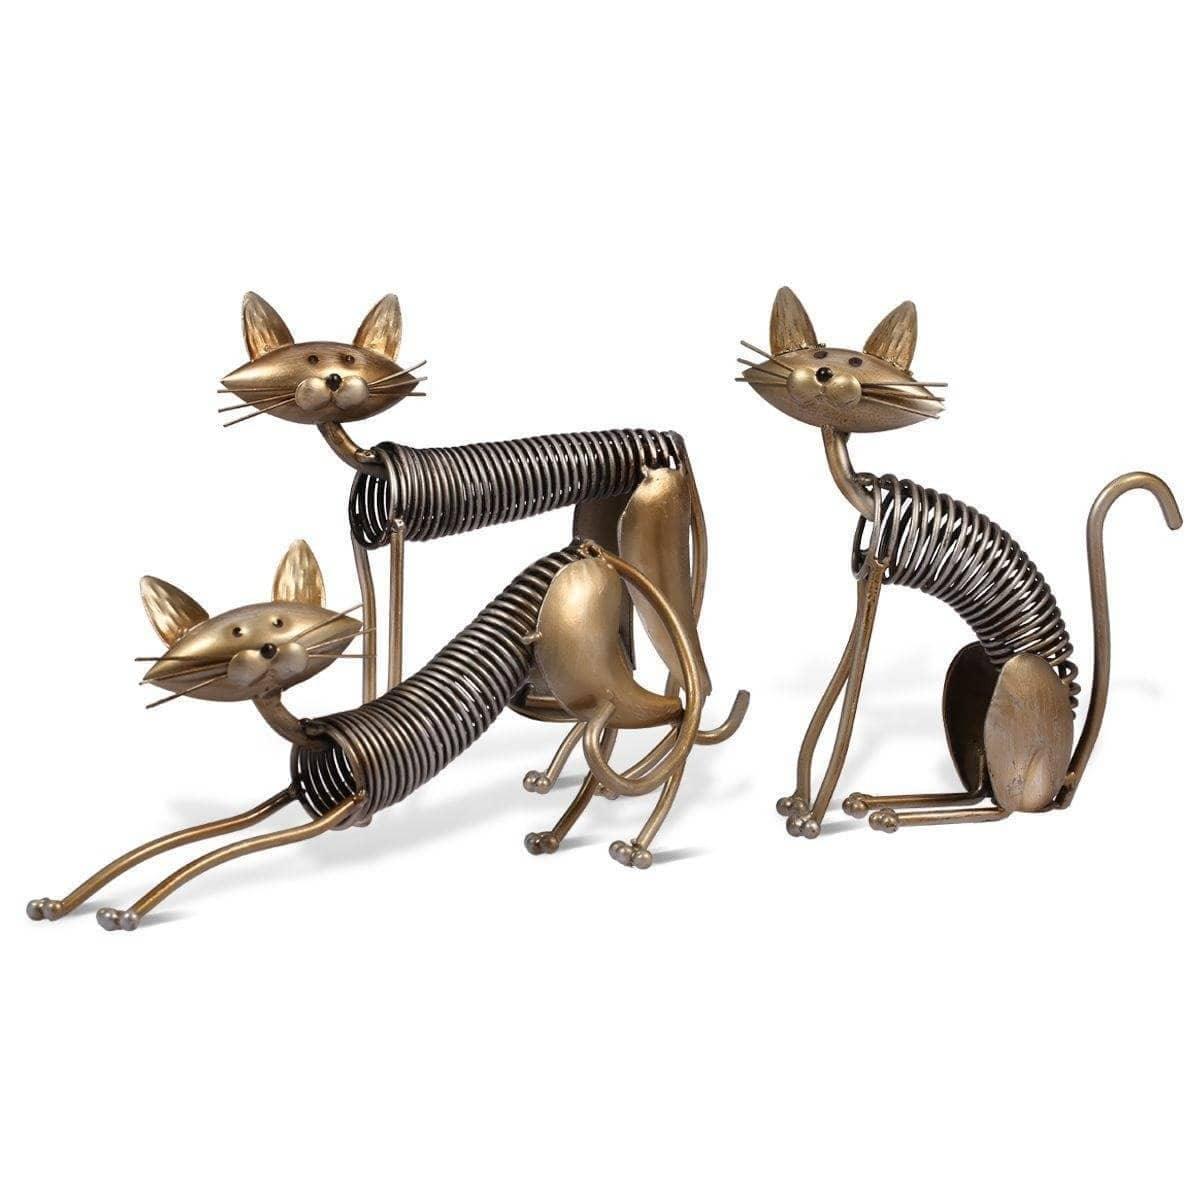 Playful Lazy Cats Decor: A Whimsical Touch for Your Home